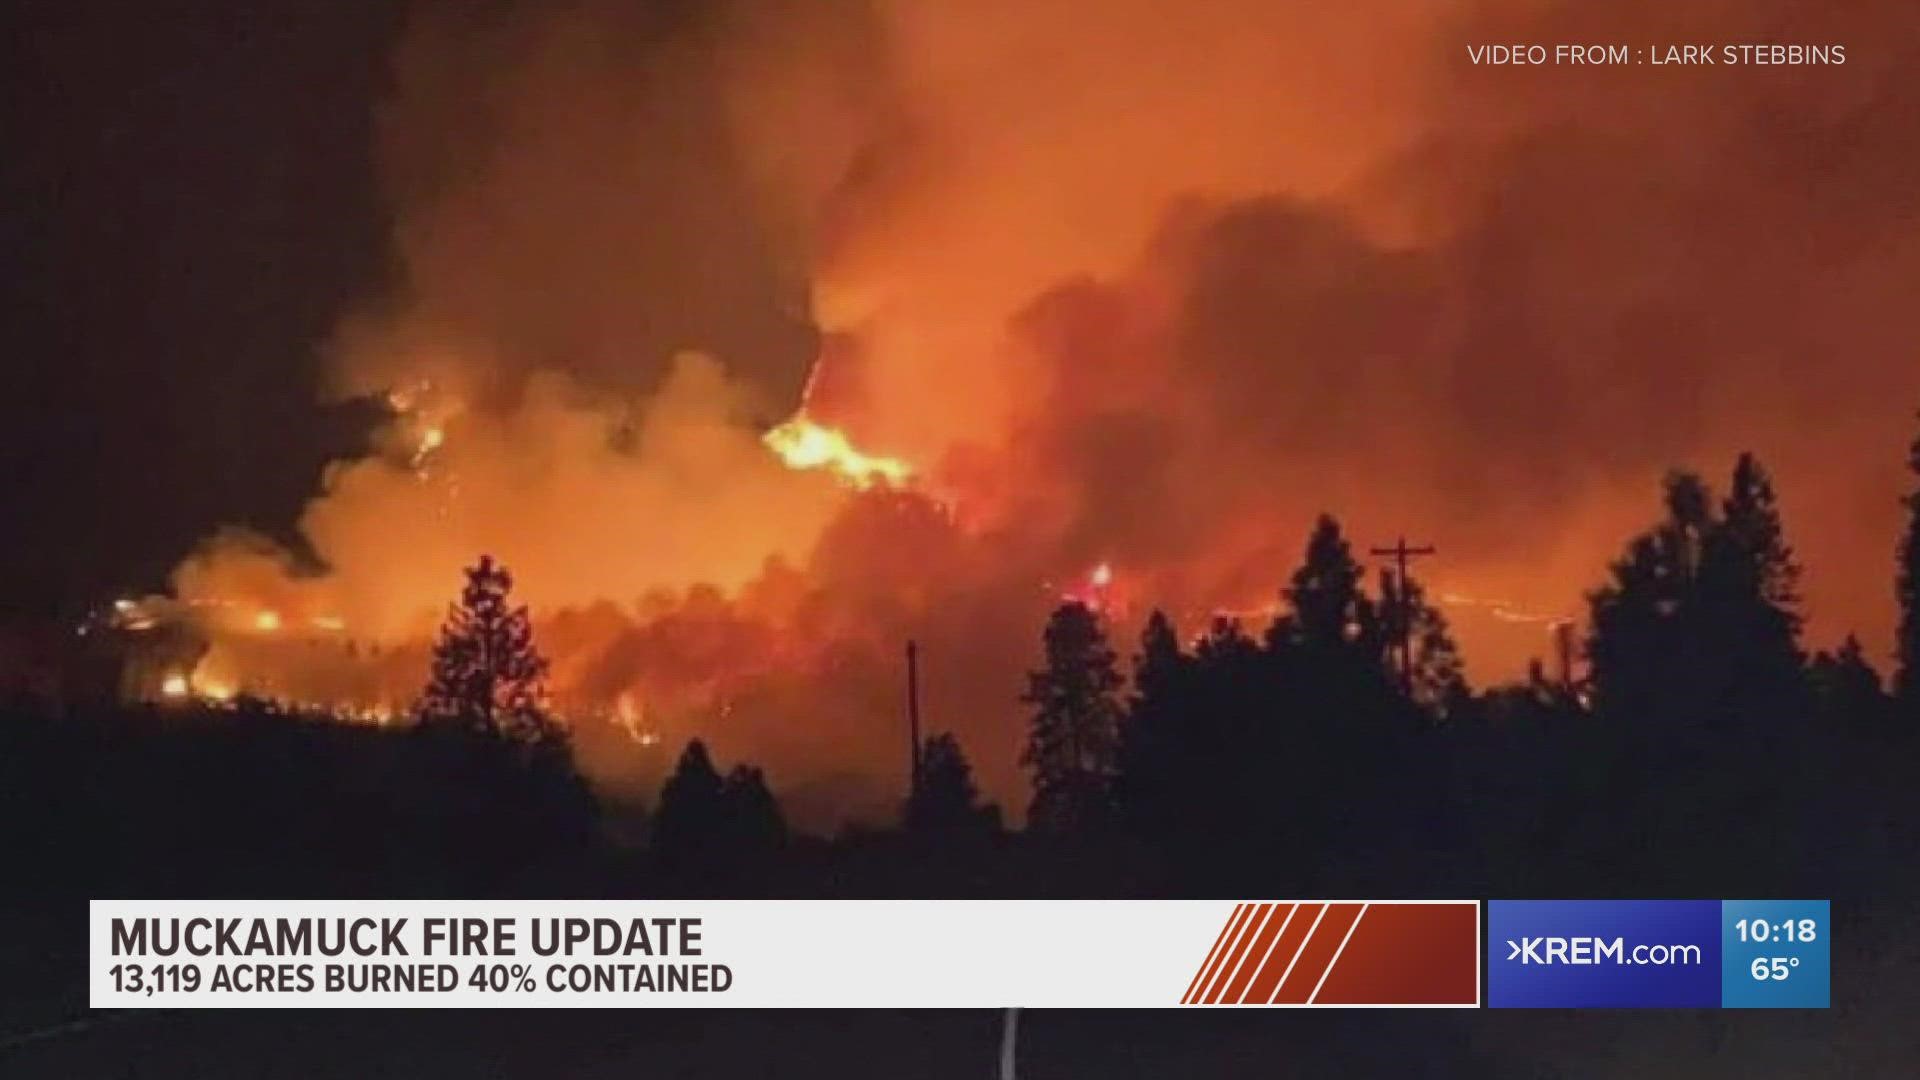 Here is the latest information on wildfires burning in Eastern and Central Washington, North Idaho and Montana.